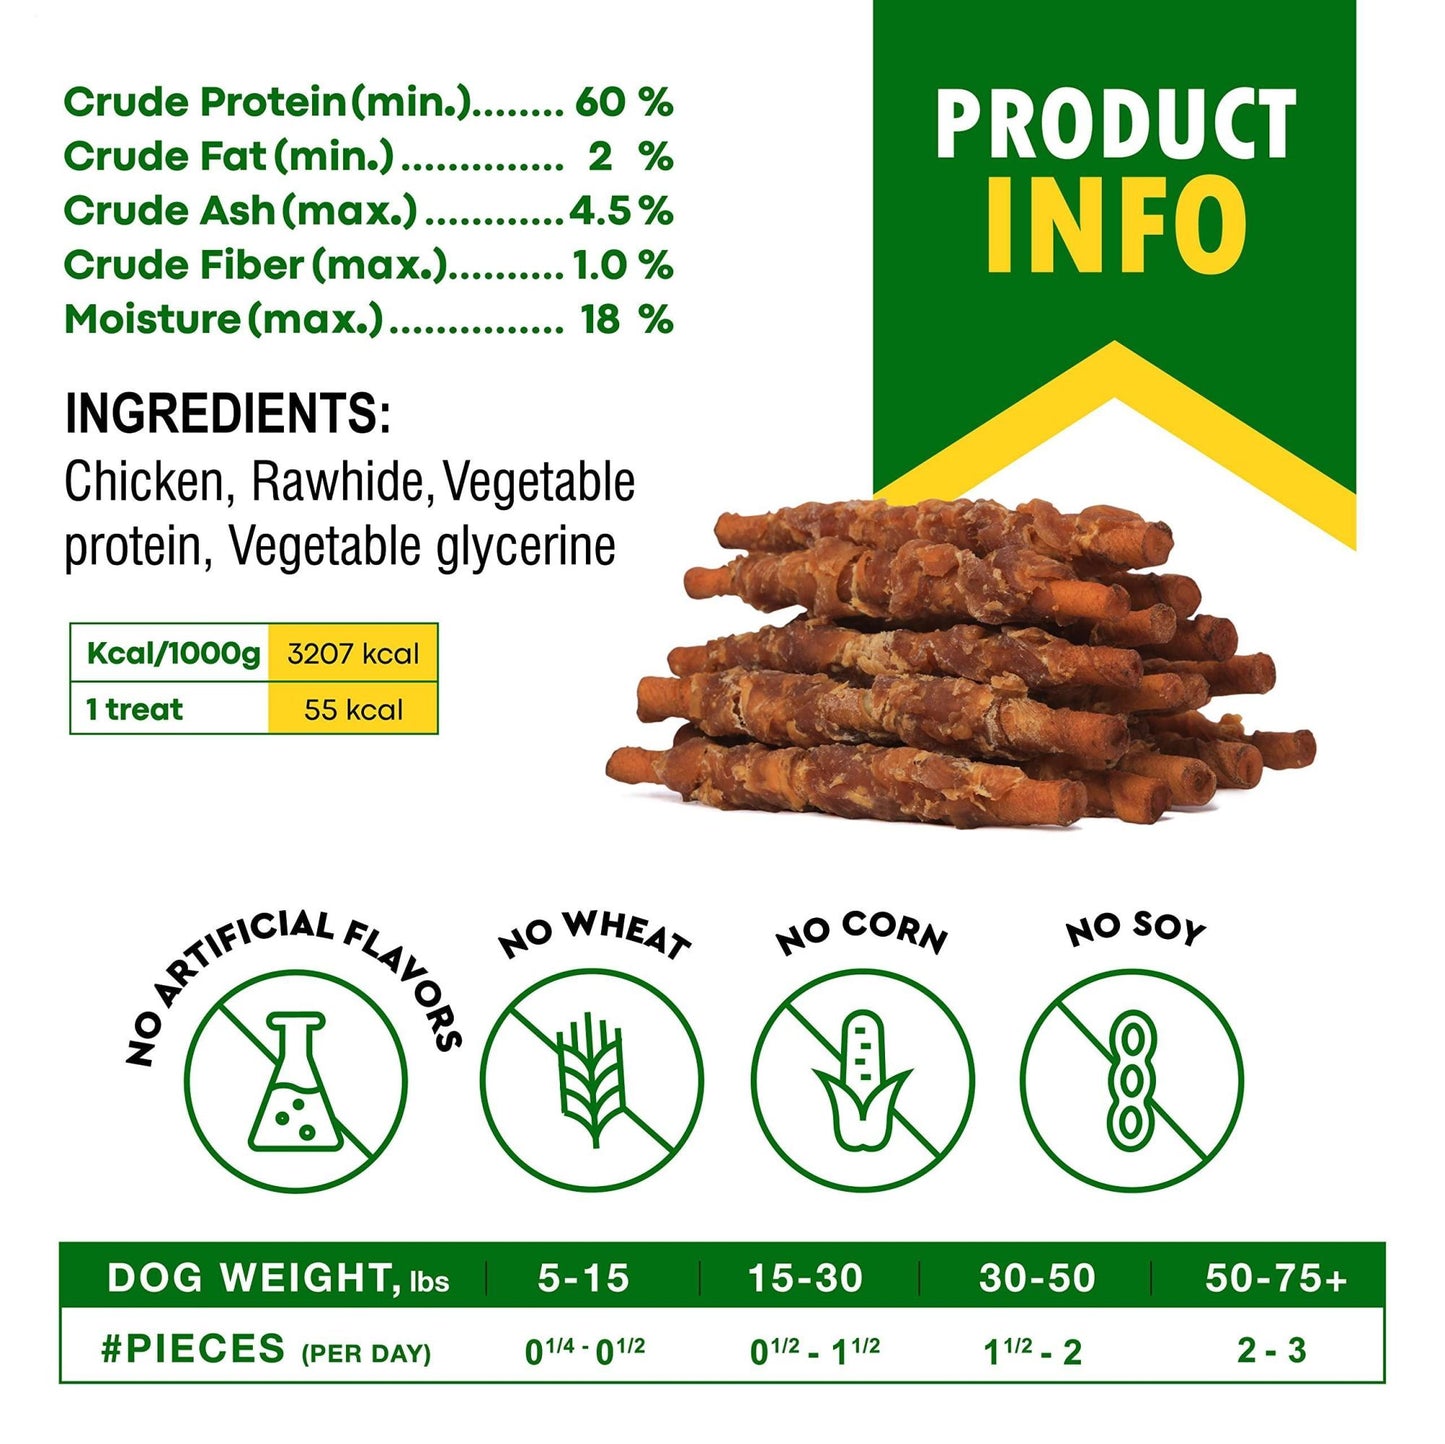 Dog Smoked Rawhide Sticks Wrapped Chicken Pet Natural Chew Treats Grain Free Organic Meat Healthy Human Grade Dried Snacks in Bulk